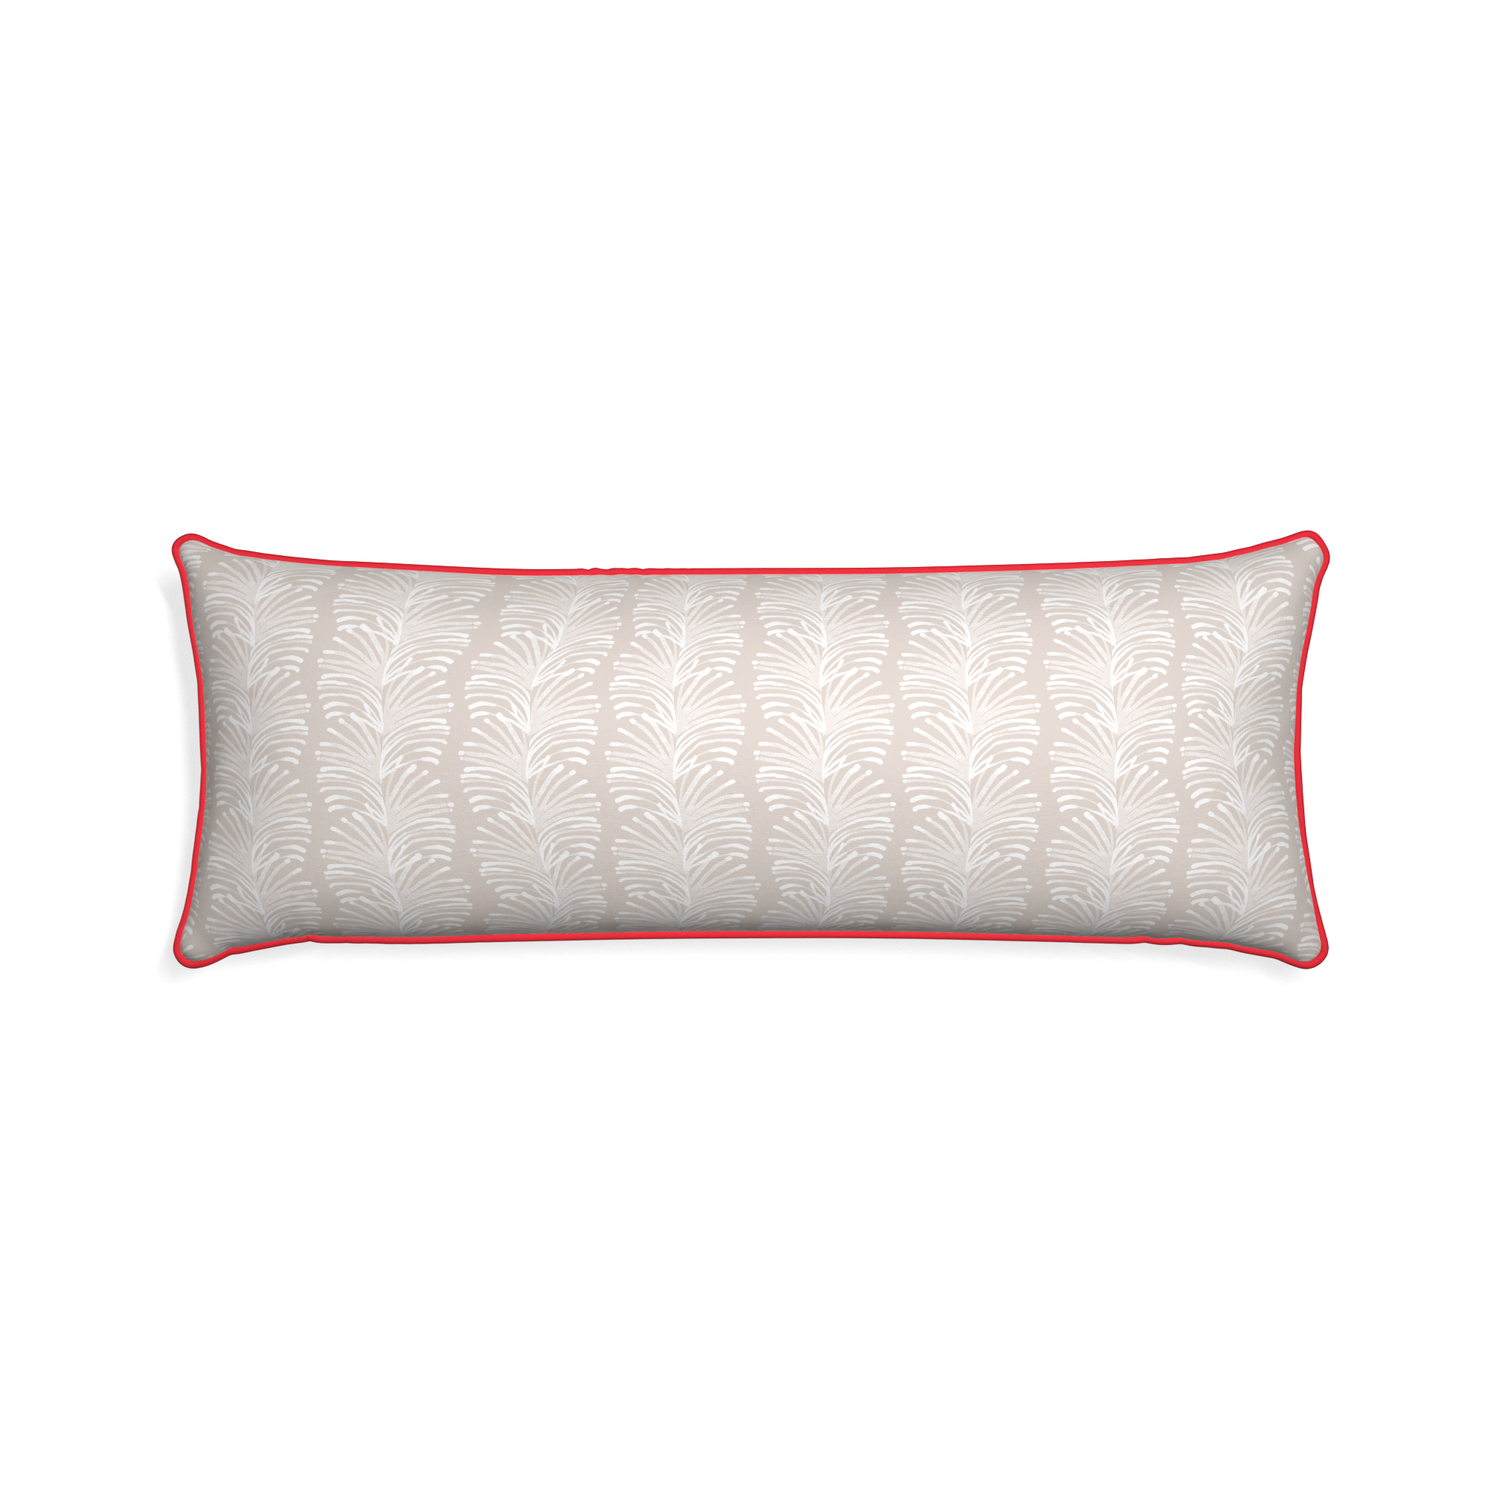 Xl-lumbar emma sand custom sand colored botanical stripepillow with cherry piping on white background